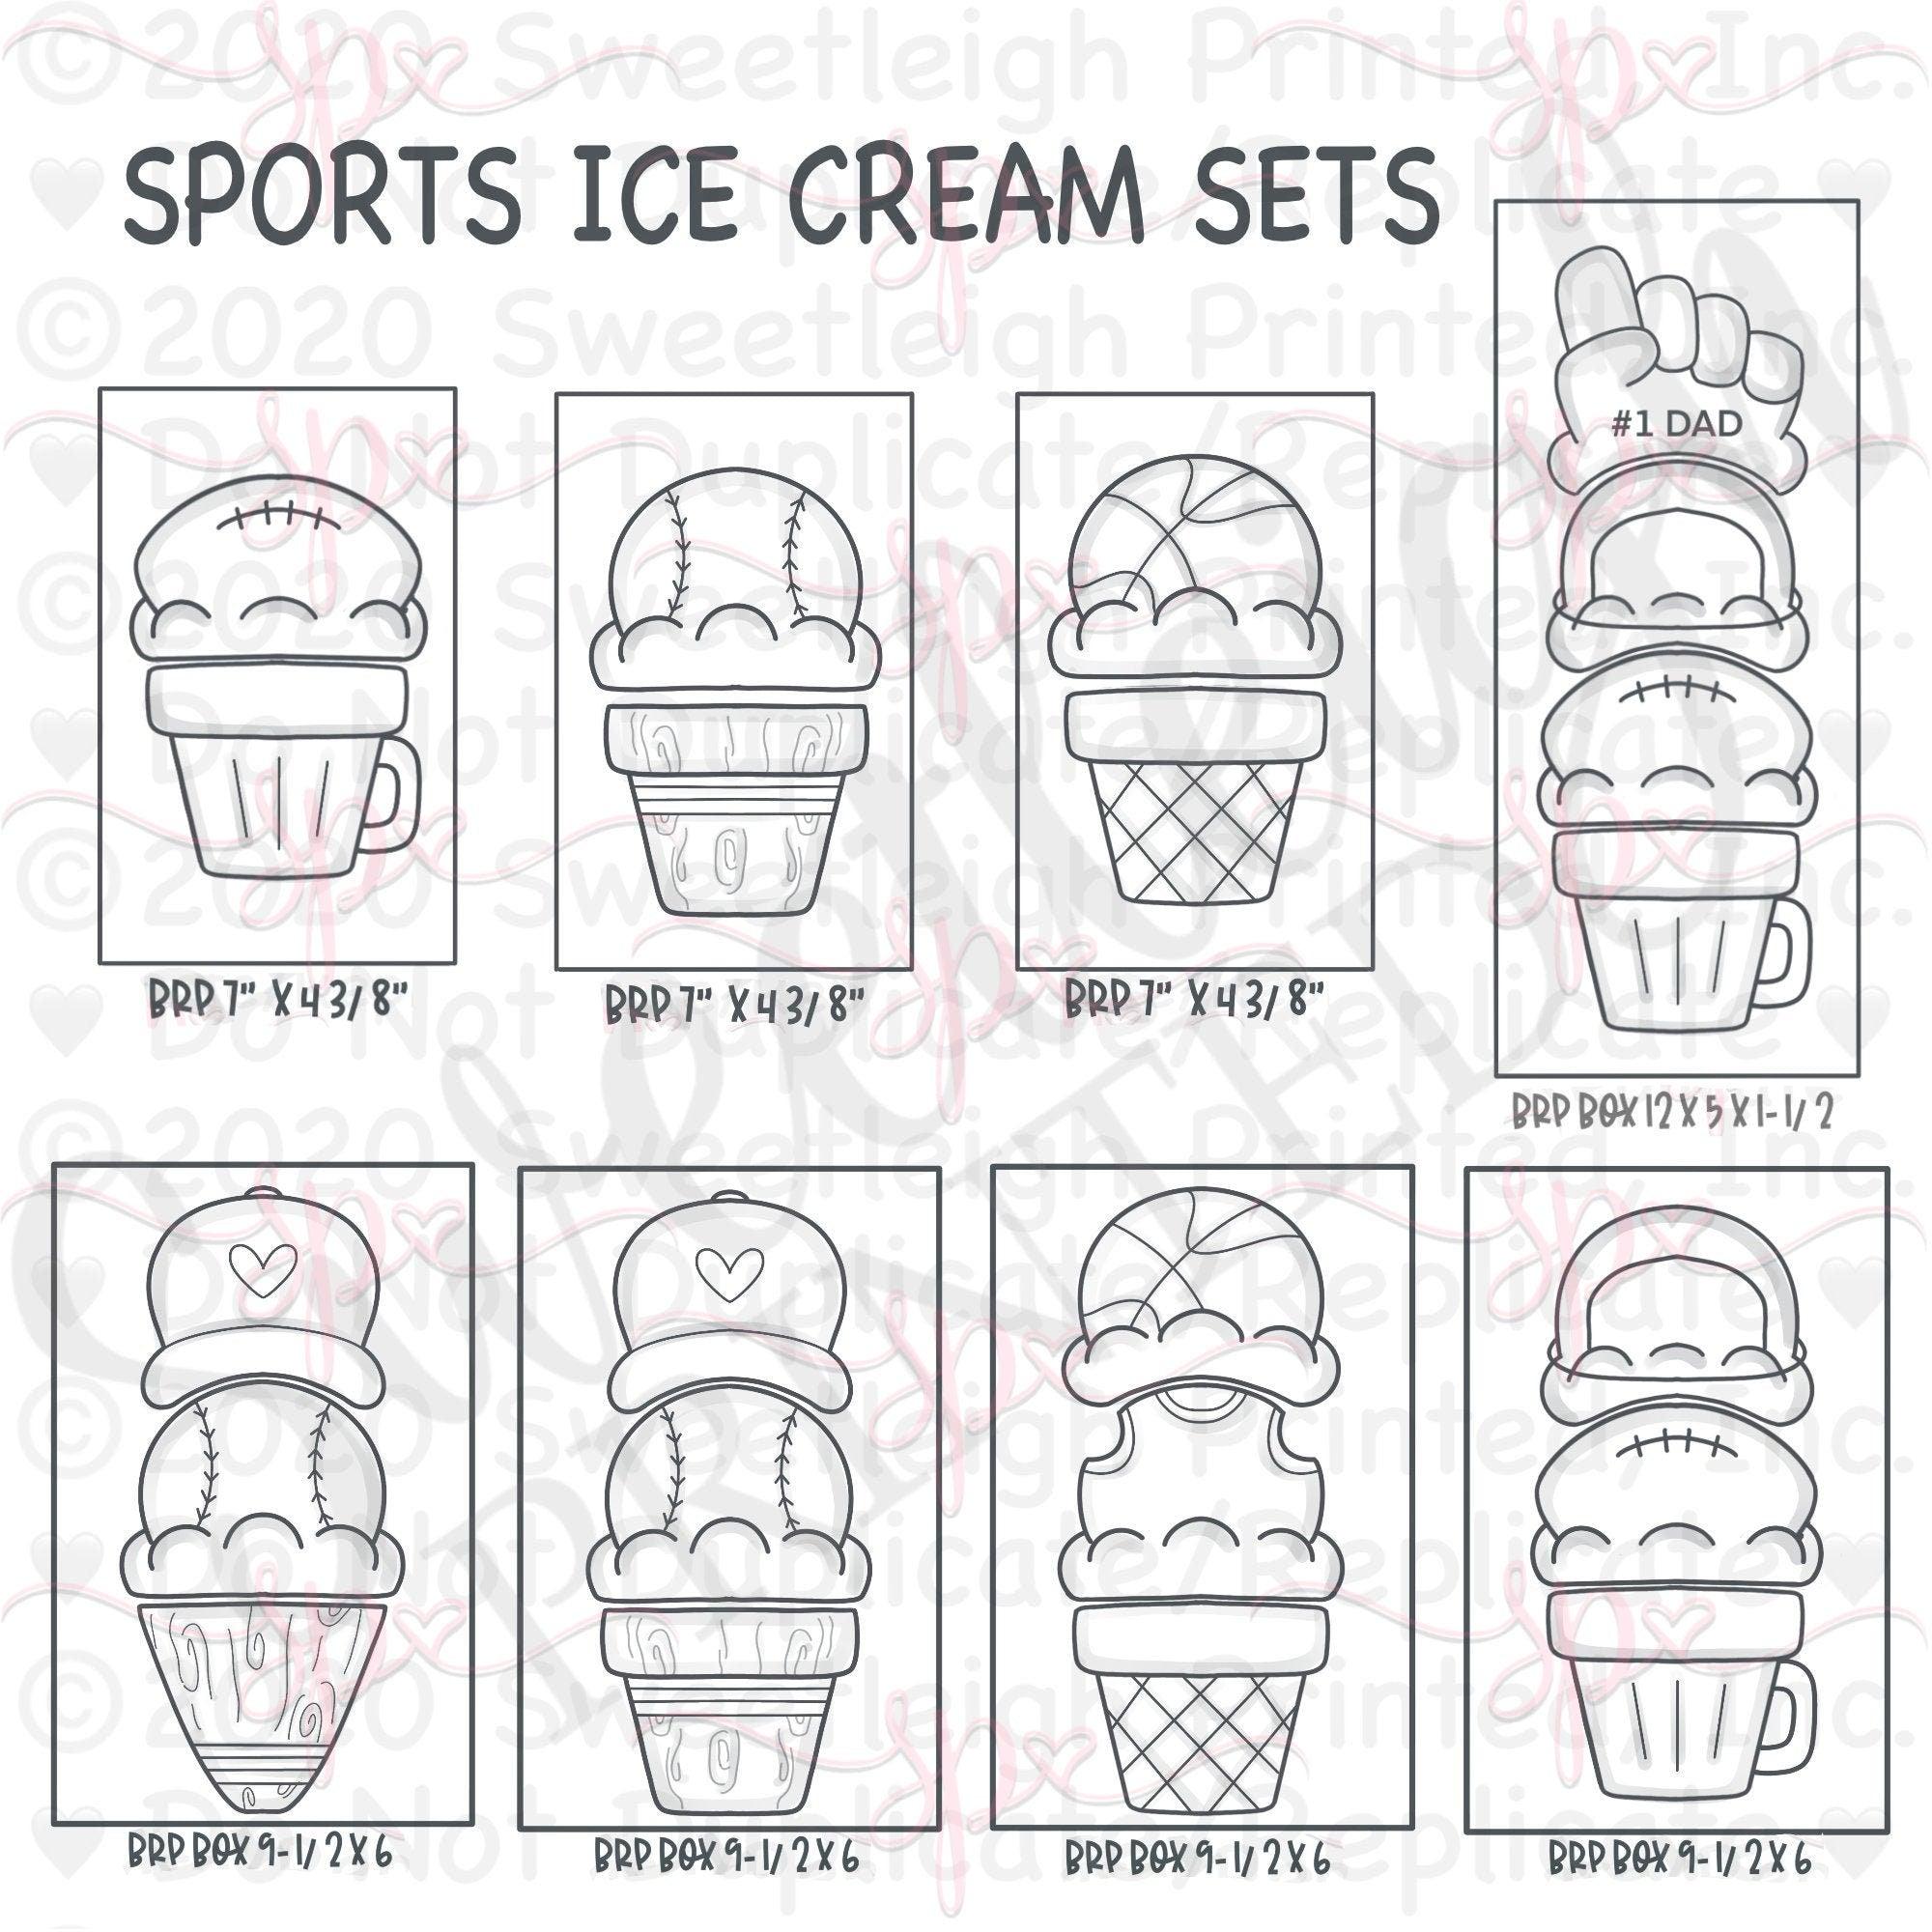 Build a Sports Ice Cream Cone Cookie Cutters - Sweetleigh 